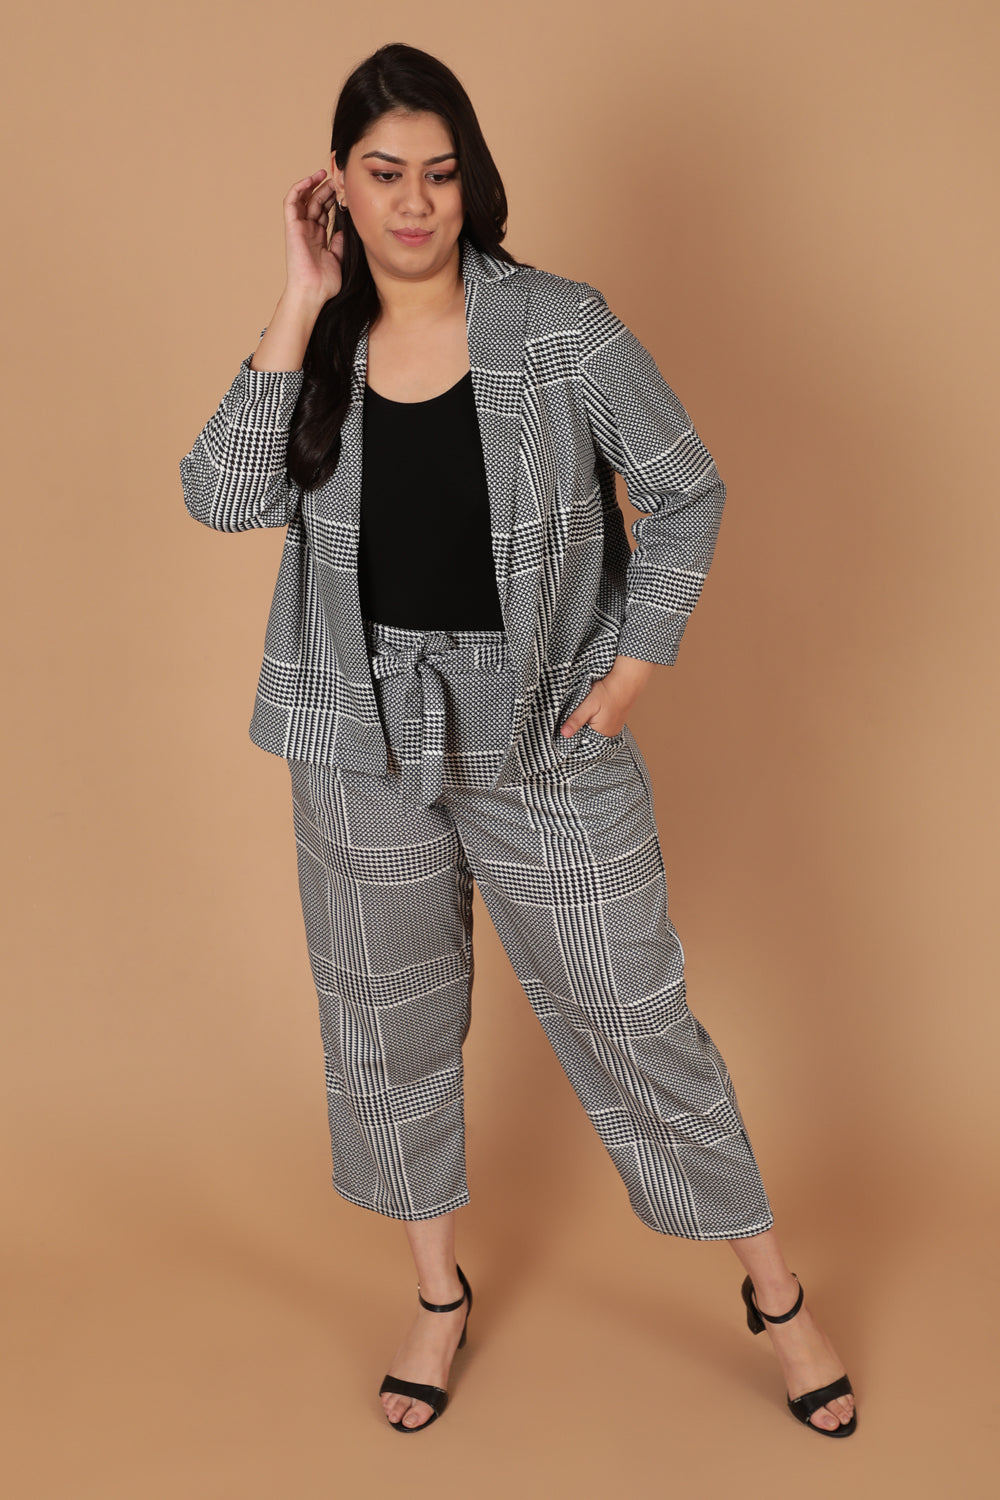 Buy Black White Houndstooth Checkered Pants